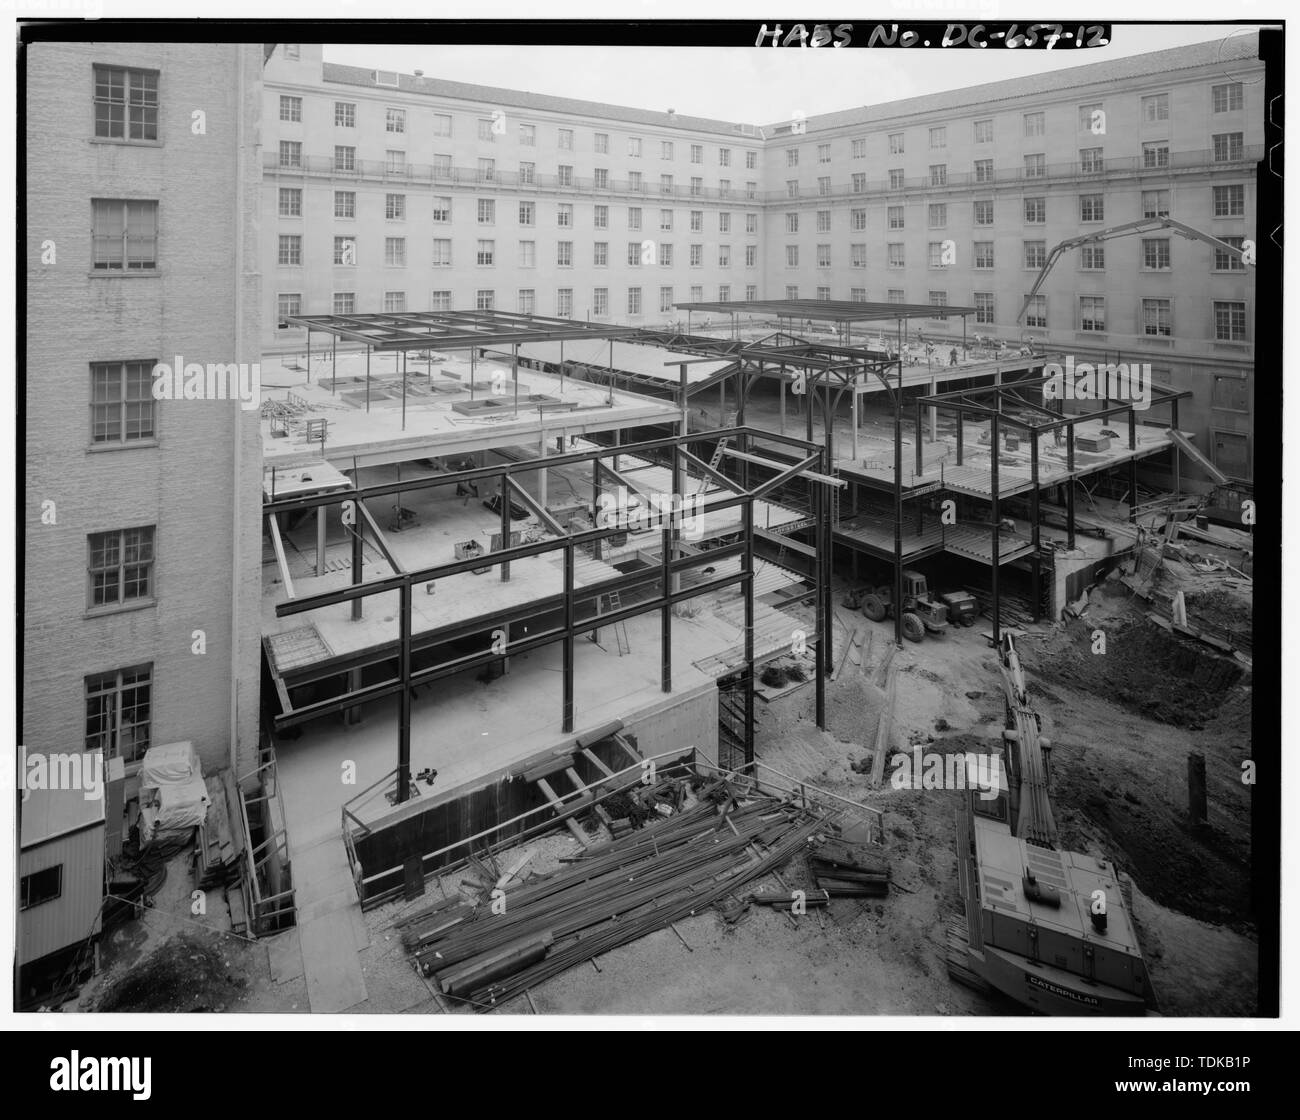 Original black-and-white print, VIEW OF PAVILION II, UNDER CONSTRUCTION, FROM OLD POST OFFICE - Internal Revenue Service Headquarters Building, 1111 Constitution Avenue Northwest, Washington, District of Columbia, DC Stock Photo